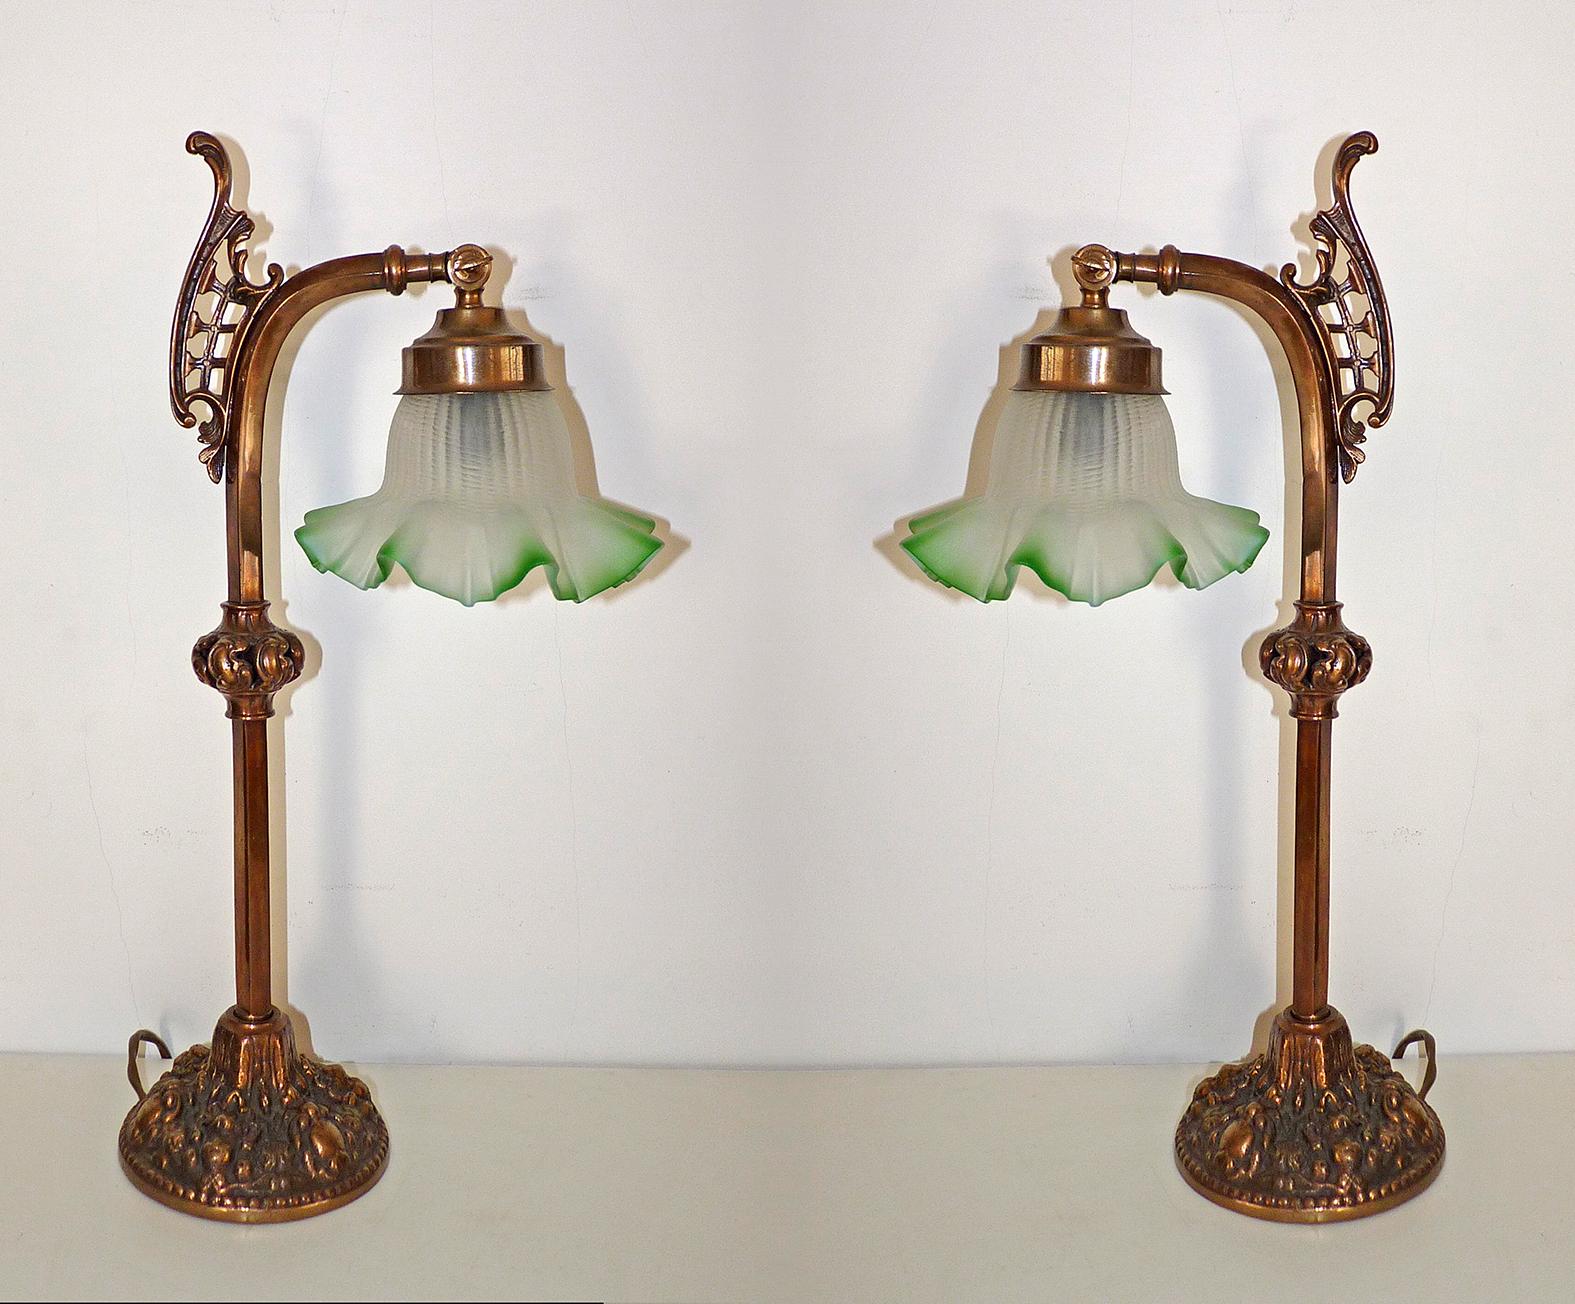 French Pair of Art Nouveau Ornate Bronze, Green Art Glass Flower Swing Arms Table Lamps